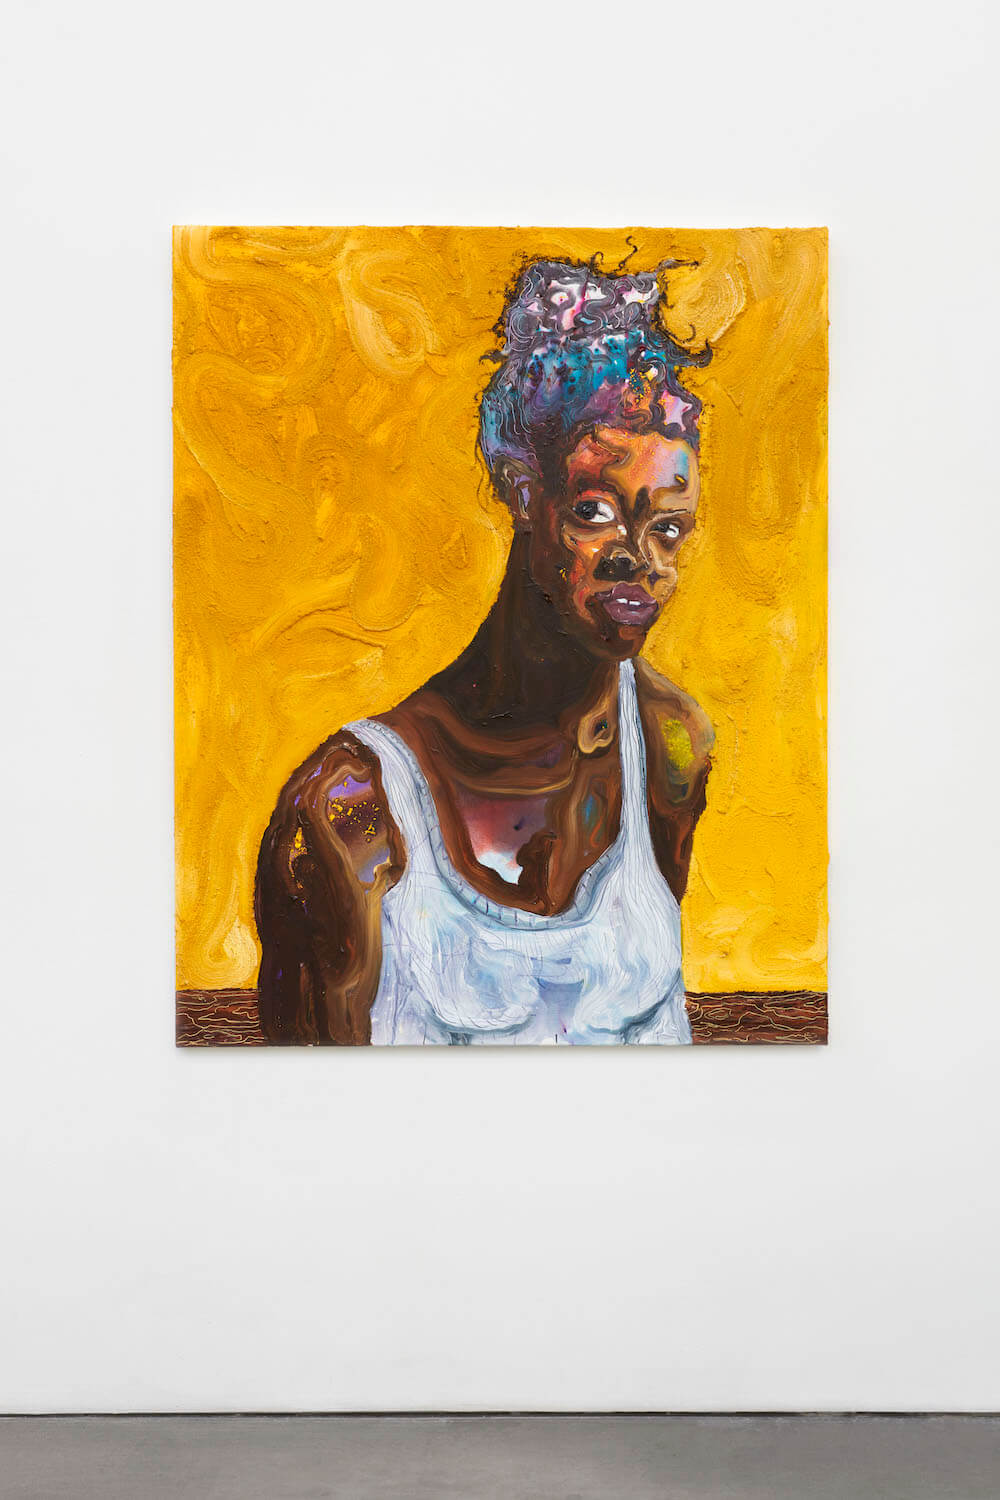 a painting by Ludovic Nkoth, there is one central figure shown from the chest up, she is a black woman in a white tank top, color shines through her hair and chest from an underpainting, the background is swirls of mustard yellow paint mixed with sand